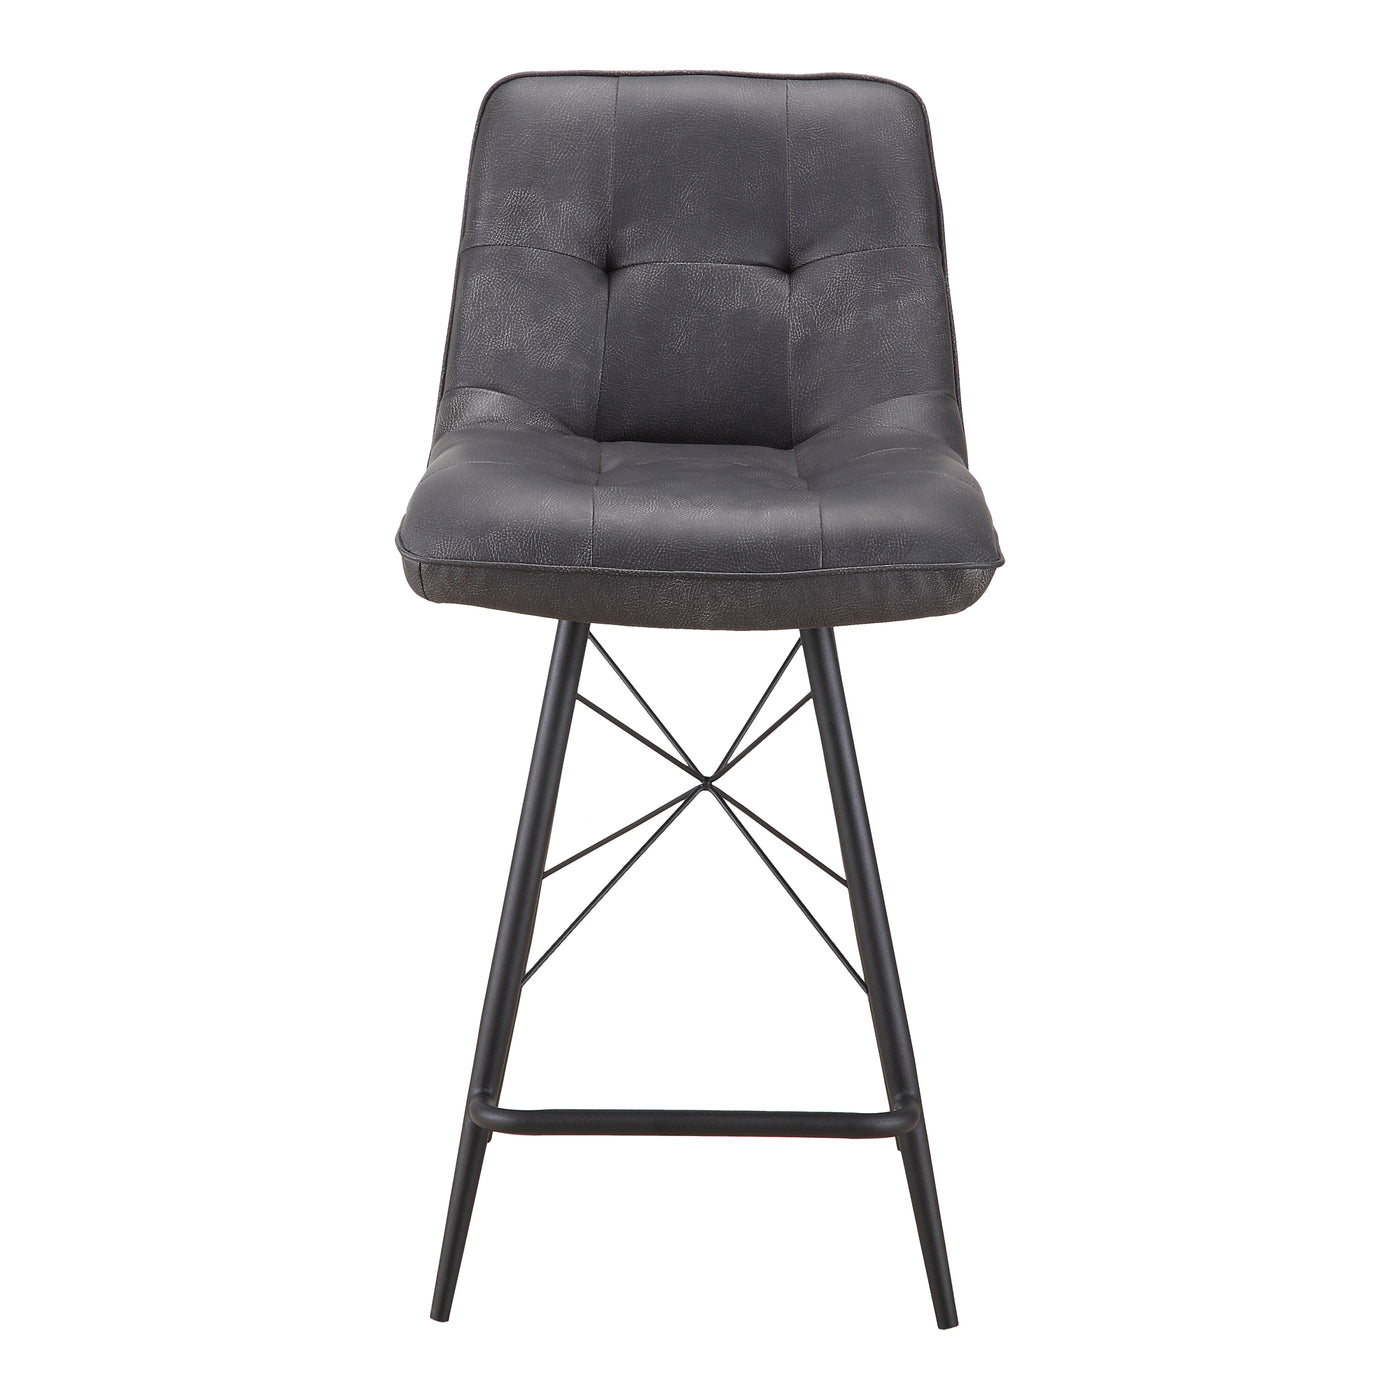 The Morrison is a sleek counter stool design, with a comfortable padded seat for long dinners with family and friends, eas...